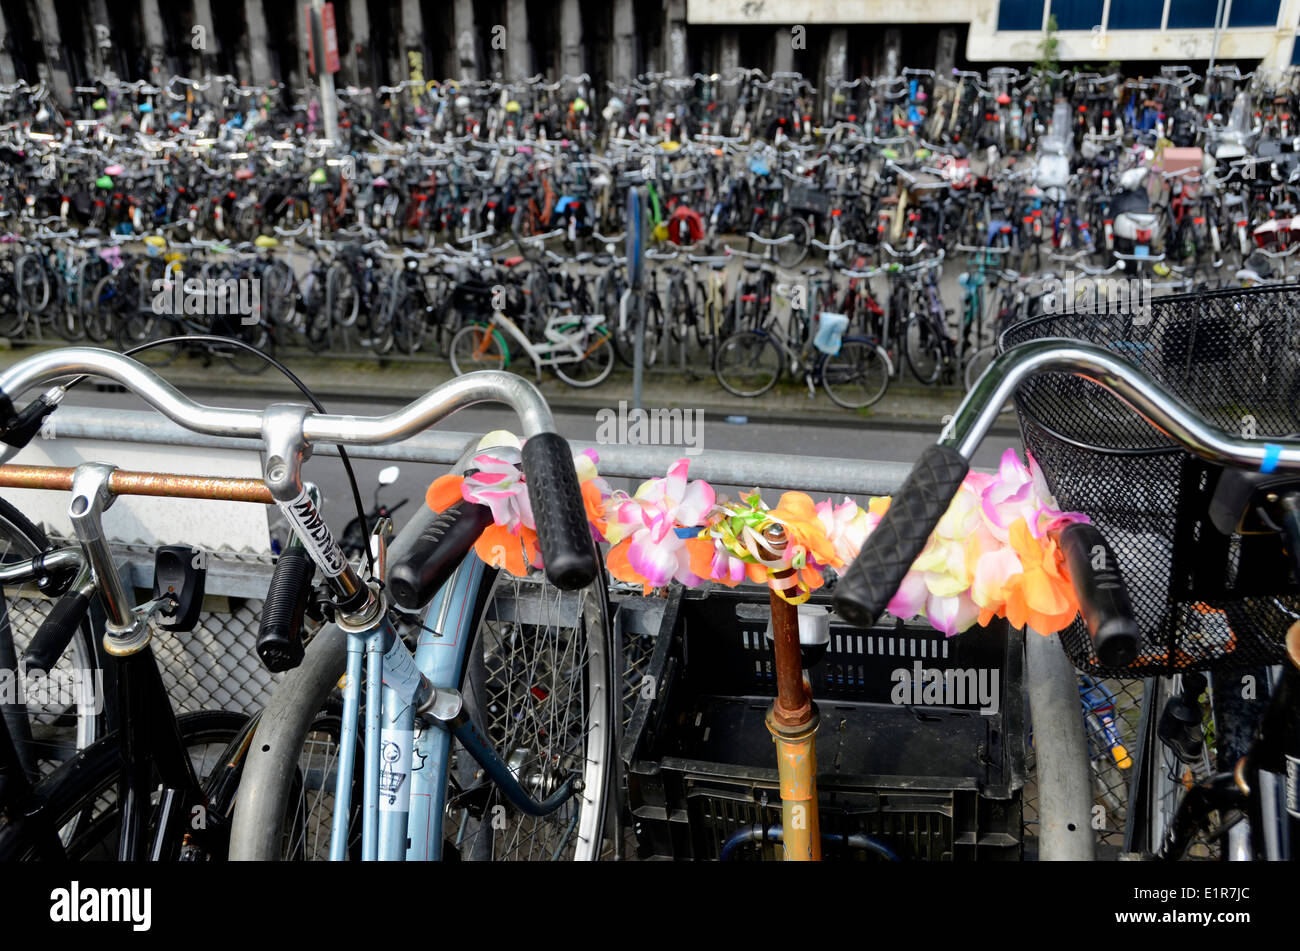 Flowers on bicycles on bike stands outside Amsterdam Central railway station Holland Stock Photo